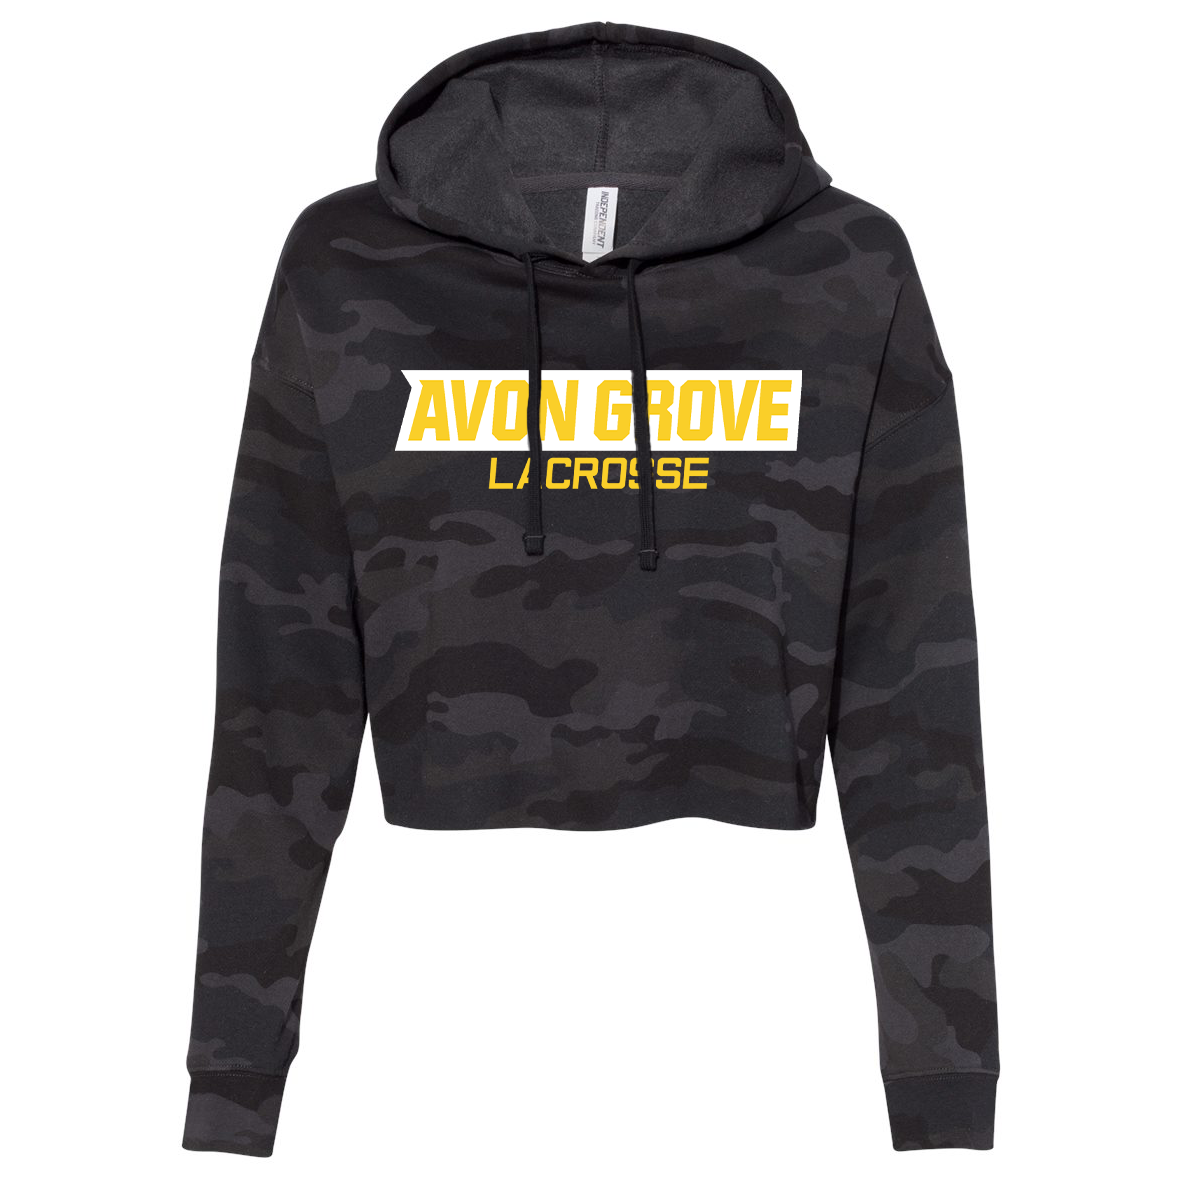 Avon Grove Lacrosse Independent Trading Co. Women’s Lightweight Cropped Hooded Sweatshirt